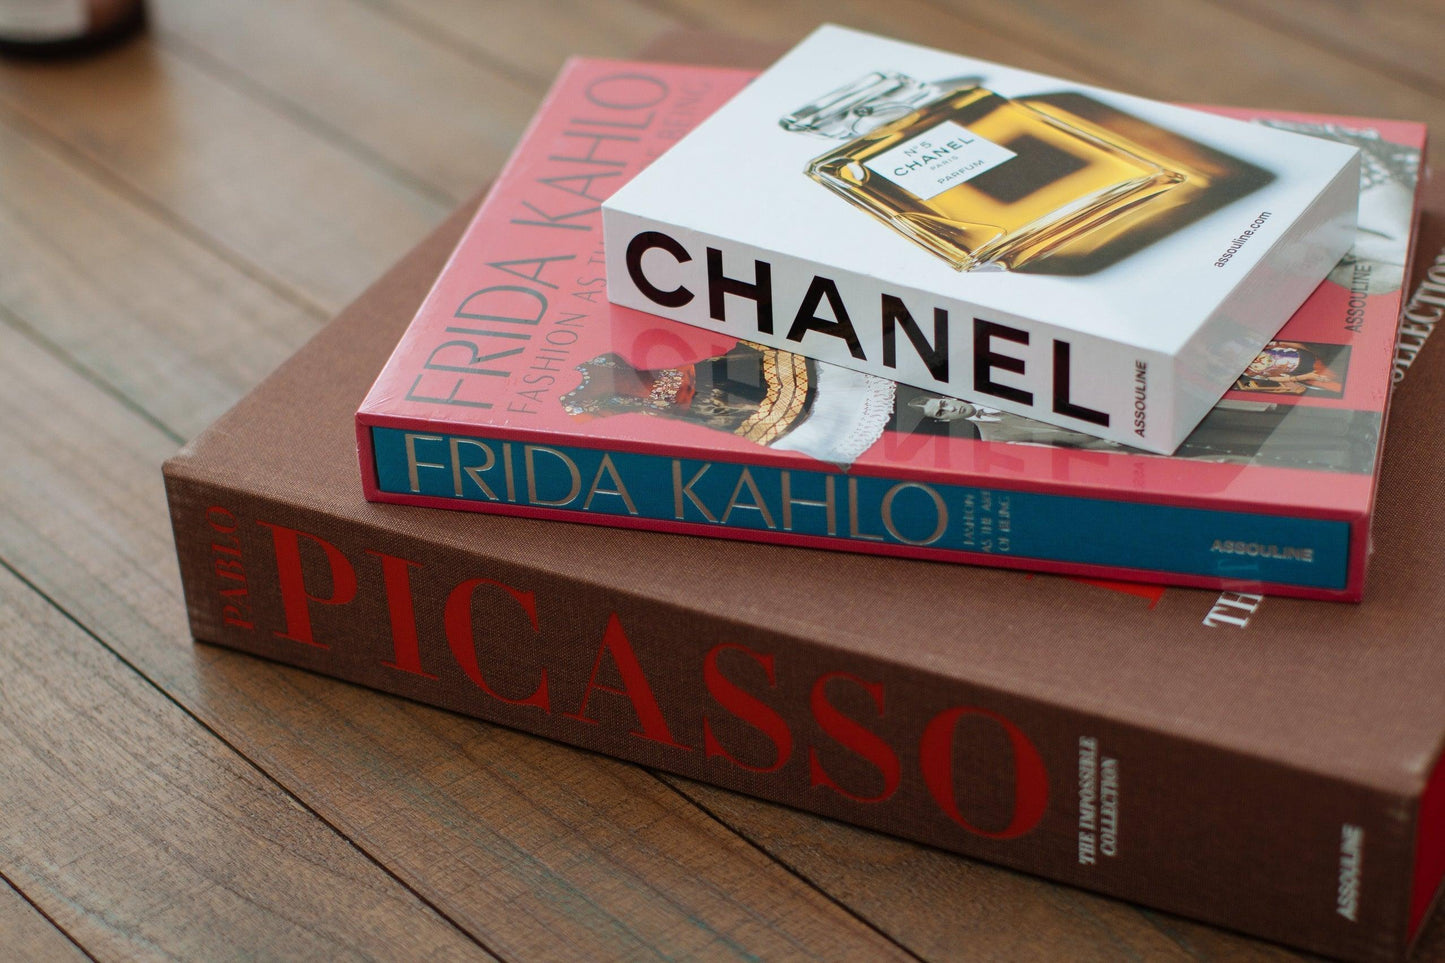 Pablo Picasso: The Impossible Collection | Coffee Table Book - CURATED BY MAVENS, LTD.